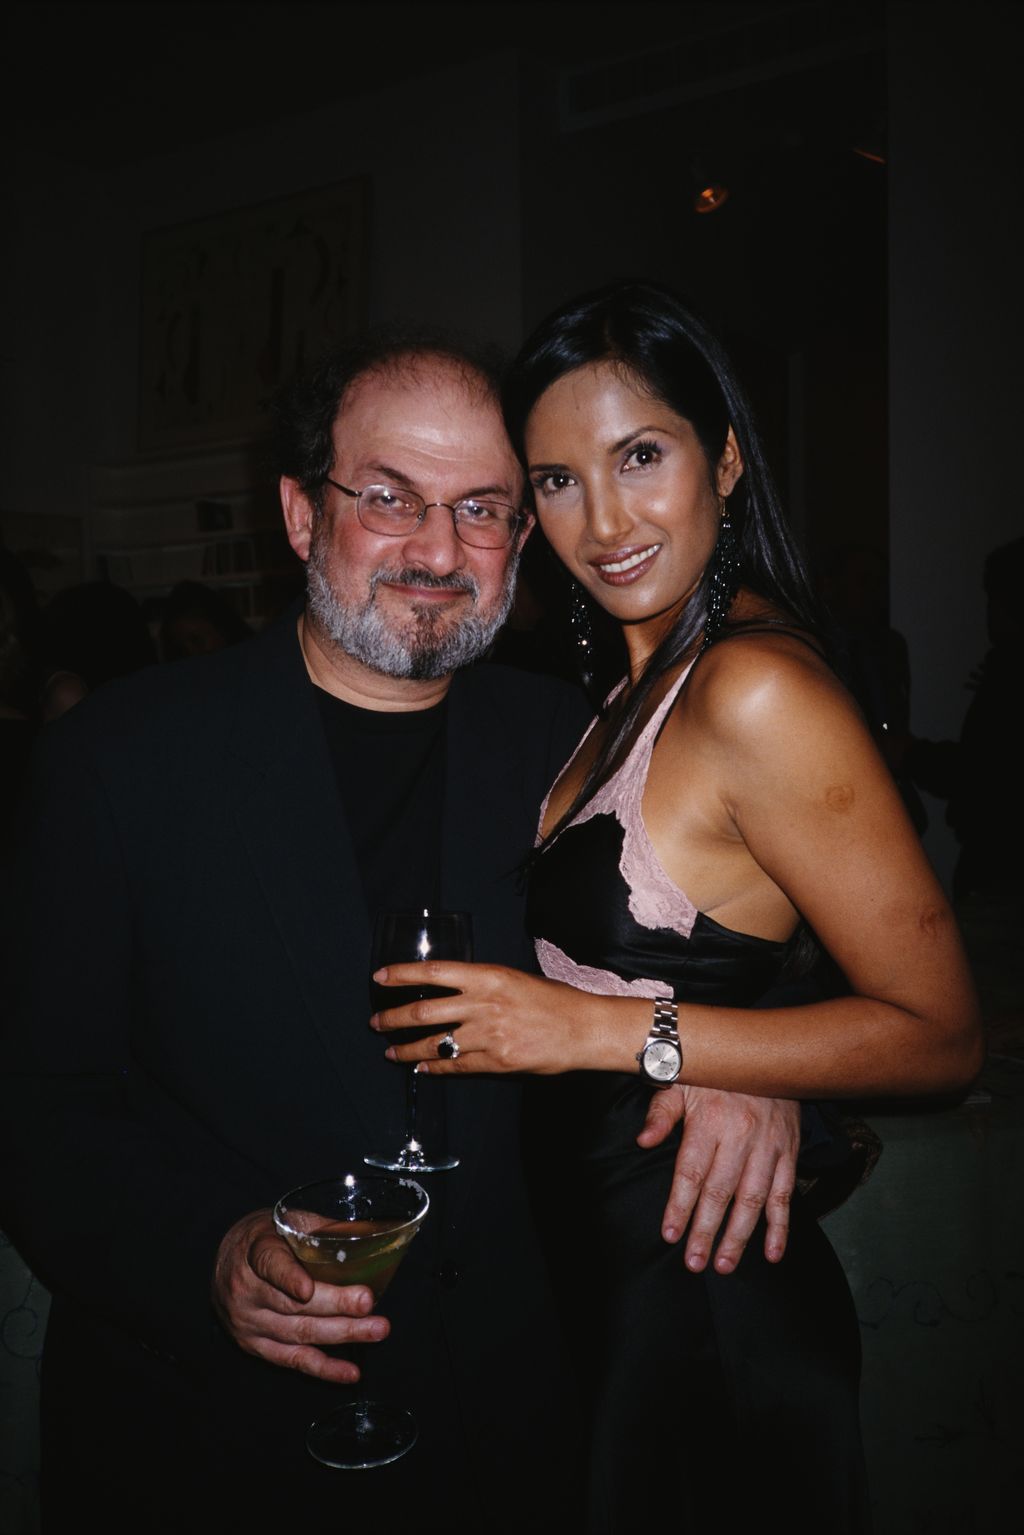 British Indian novelist Salman Rushdie with his partner, actress and author Padma Lakshmi at a Talk Magazine party for Martin Amis in New York City, 2000. (Photo by Rose Hartman/Getty Images)